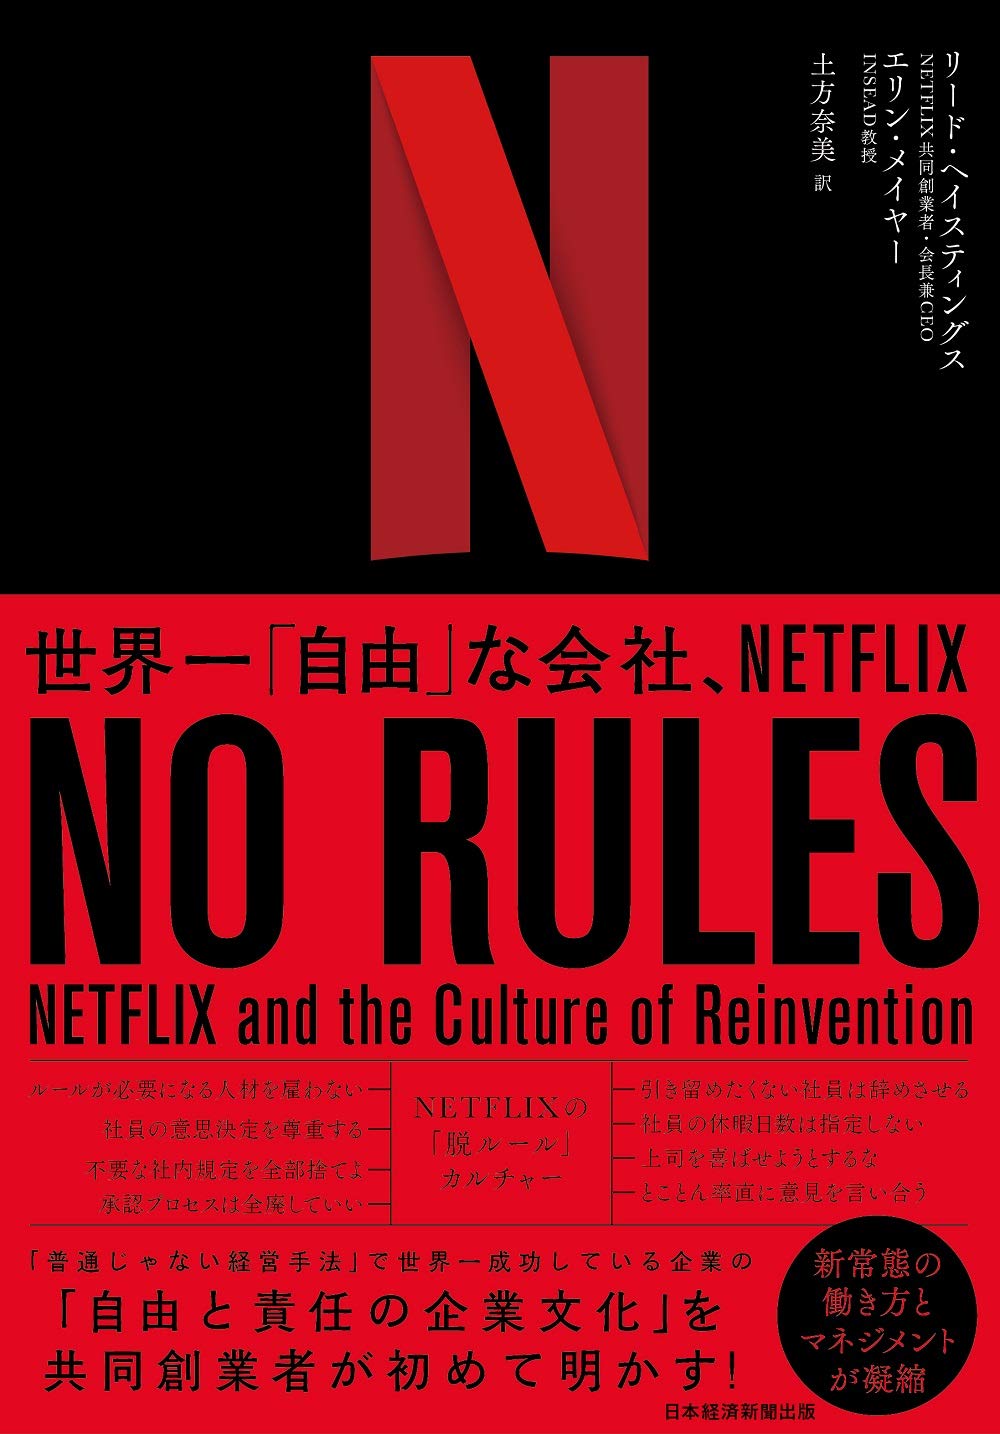 netflix and the culture of reinvention